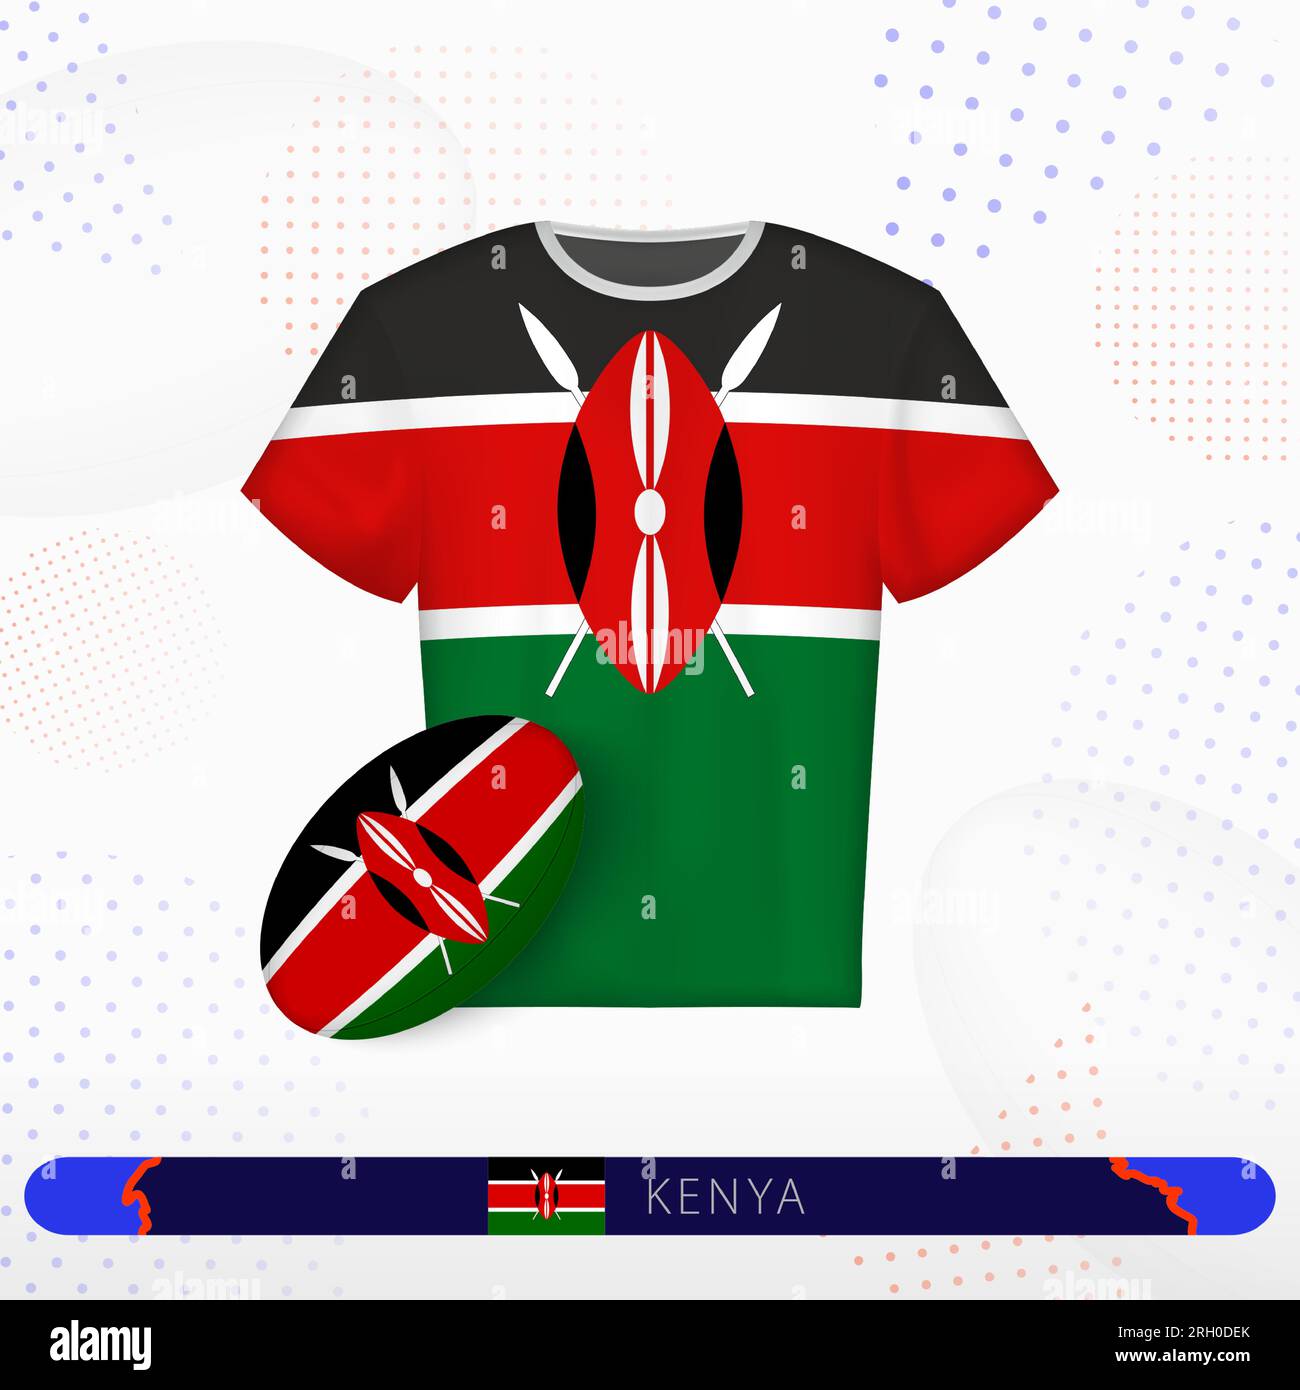 Kenya rugby jersey with rugby ball of Kenya on abstract sport background. Jersey design. Stock Vector